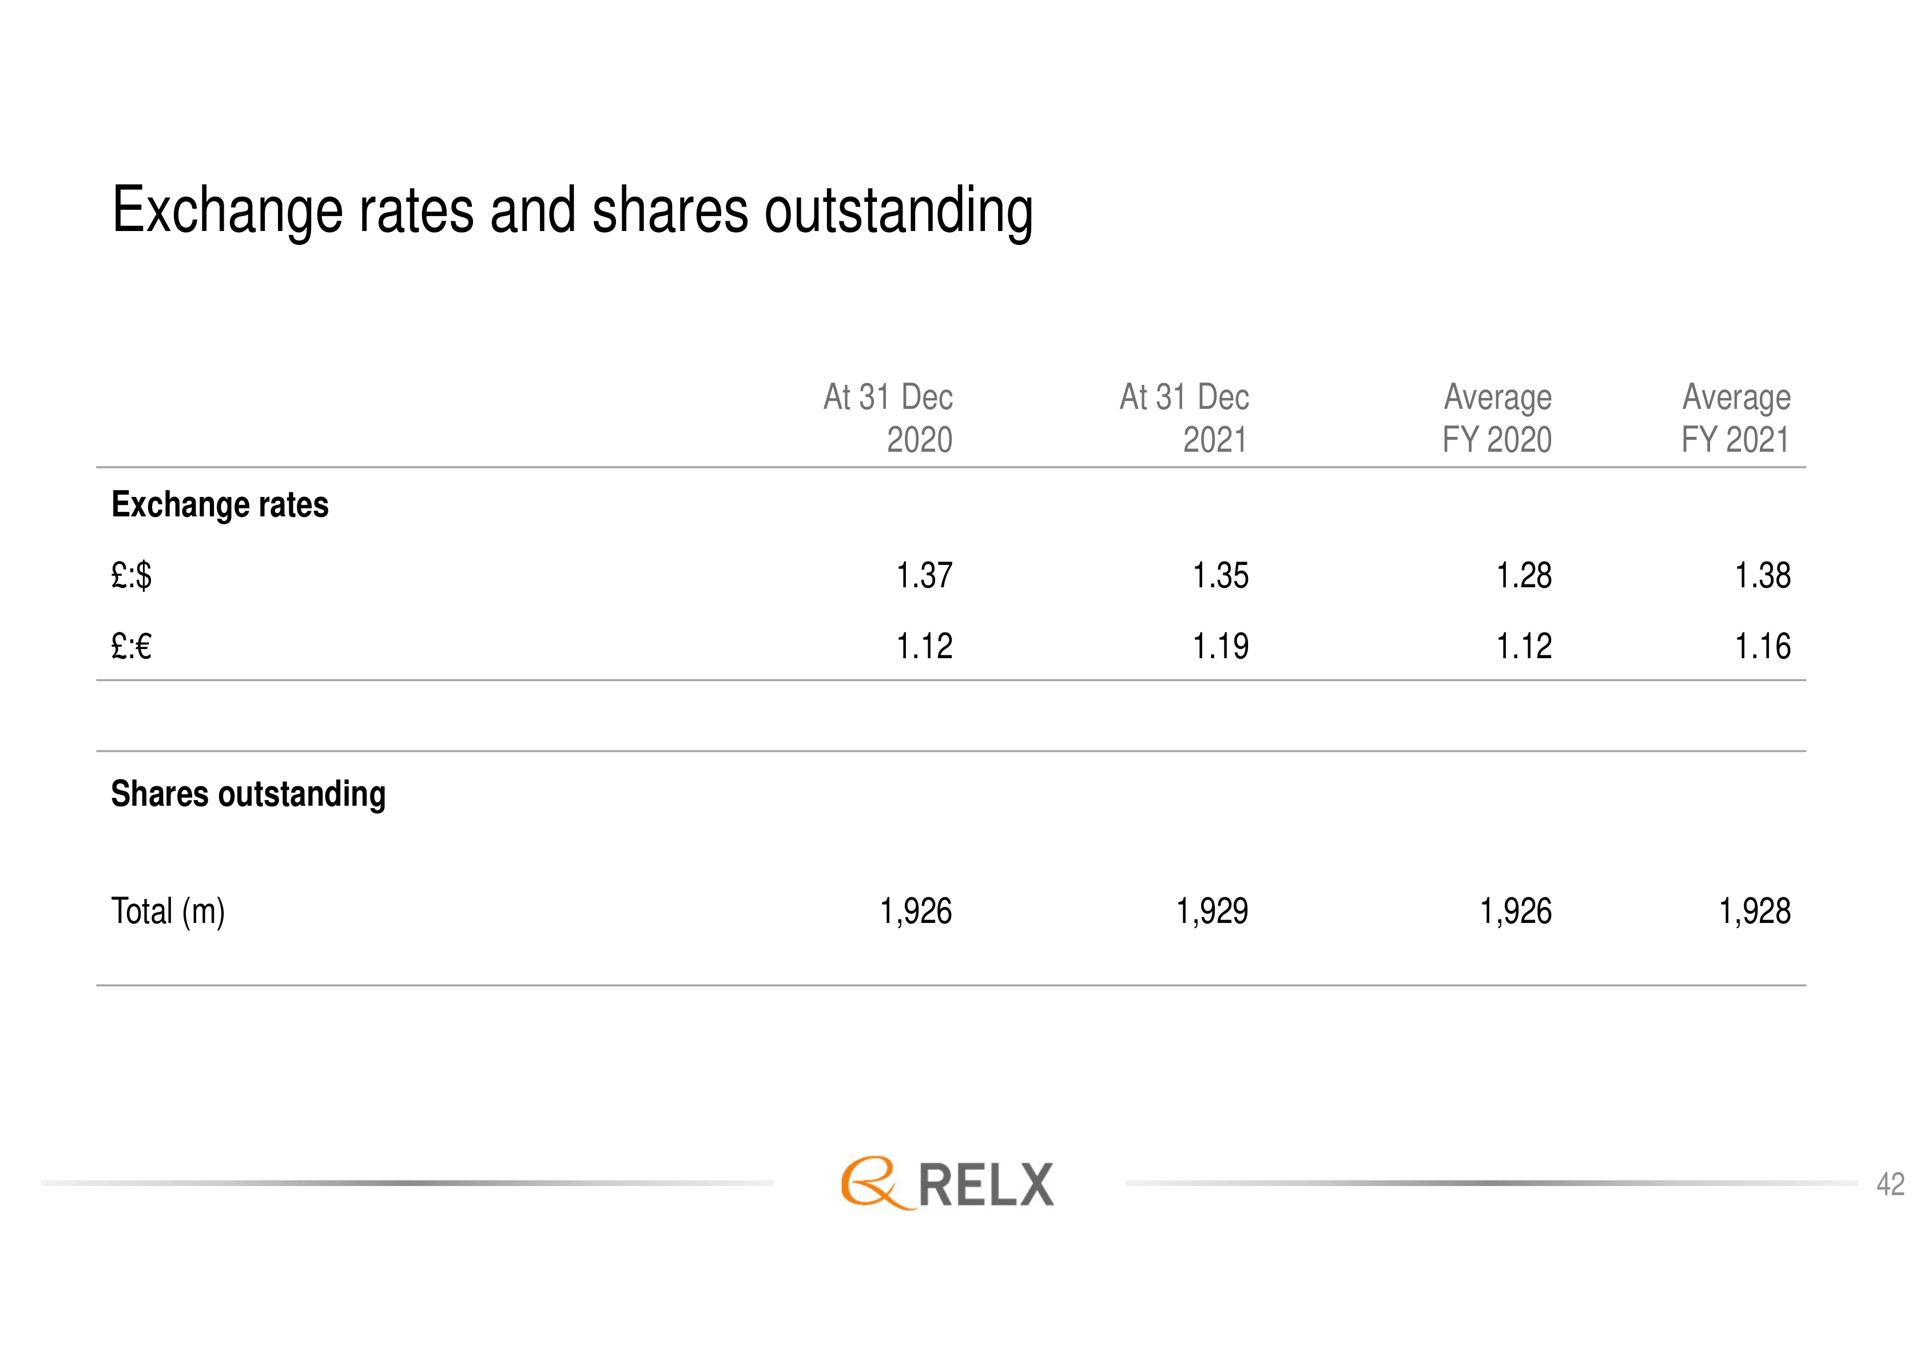 exchange rates and shares outstanding total | RELX